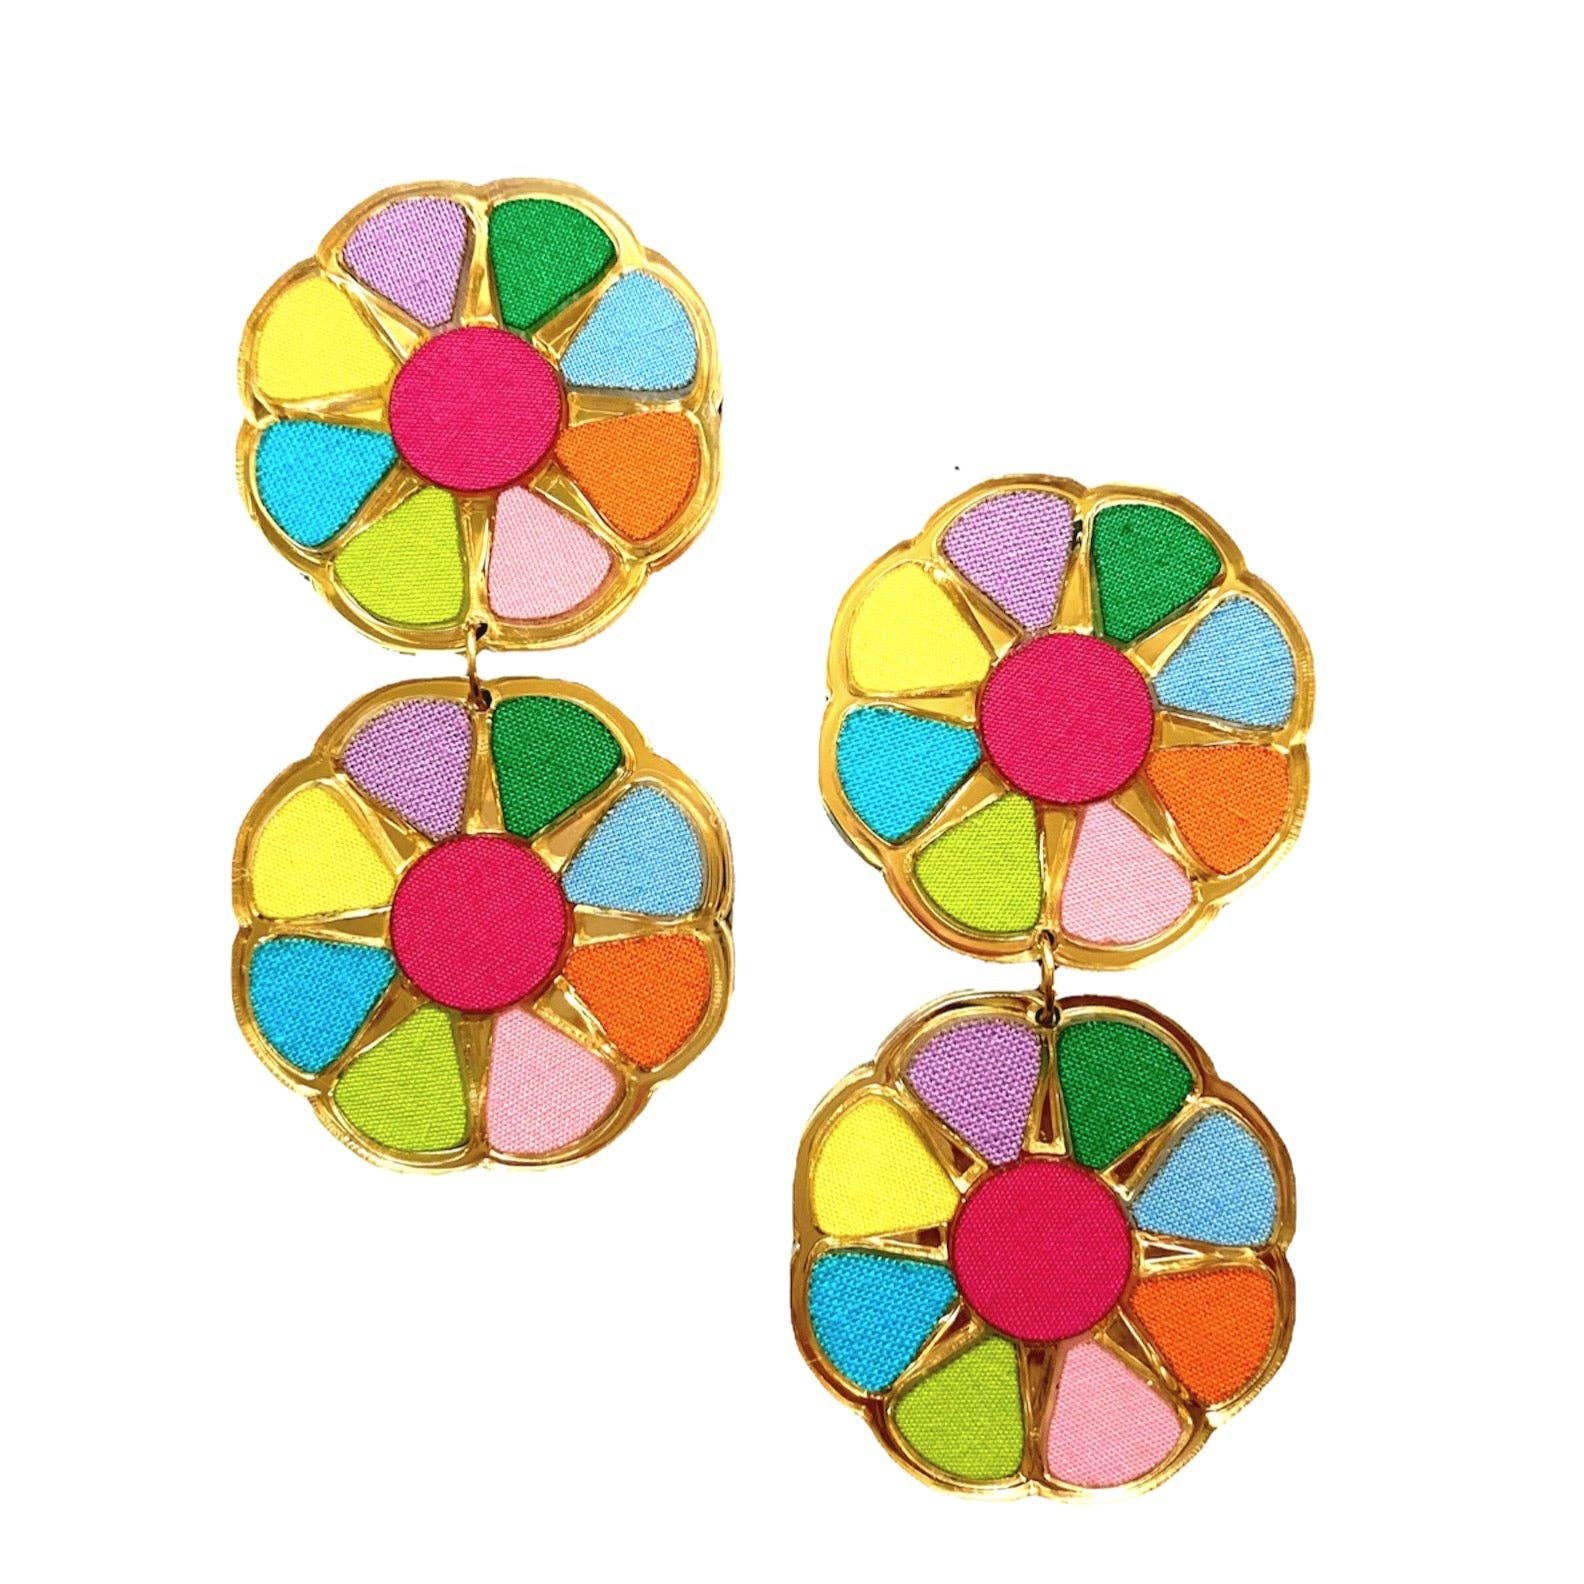 bright rainbow color blocked earrings. 2 pieces attached with a drop ring. small petals of fabric color include purple, green, turquoise, orange, light pink, and yellow. Bright pink center. 